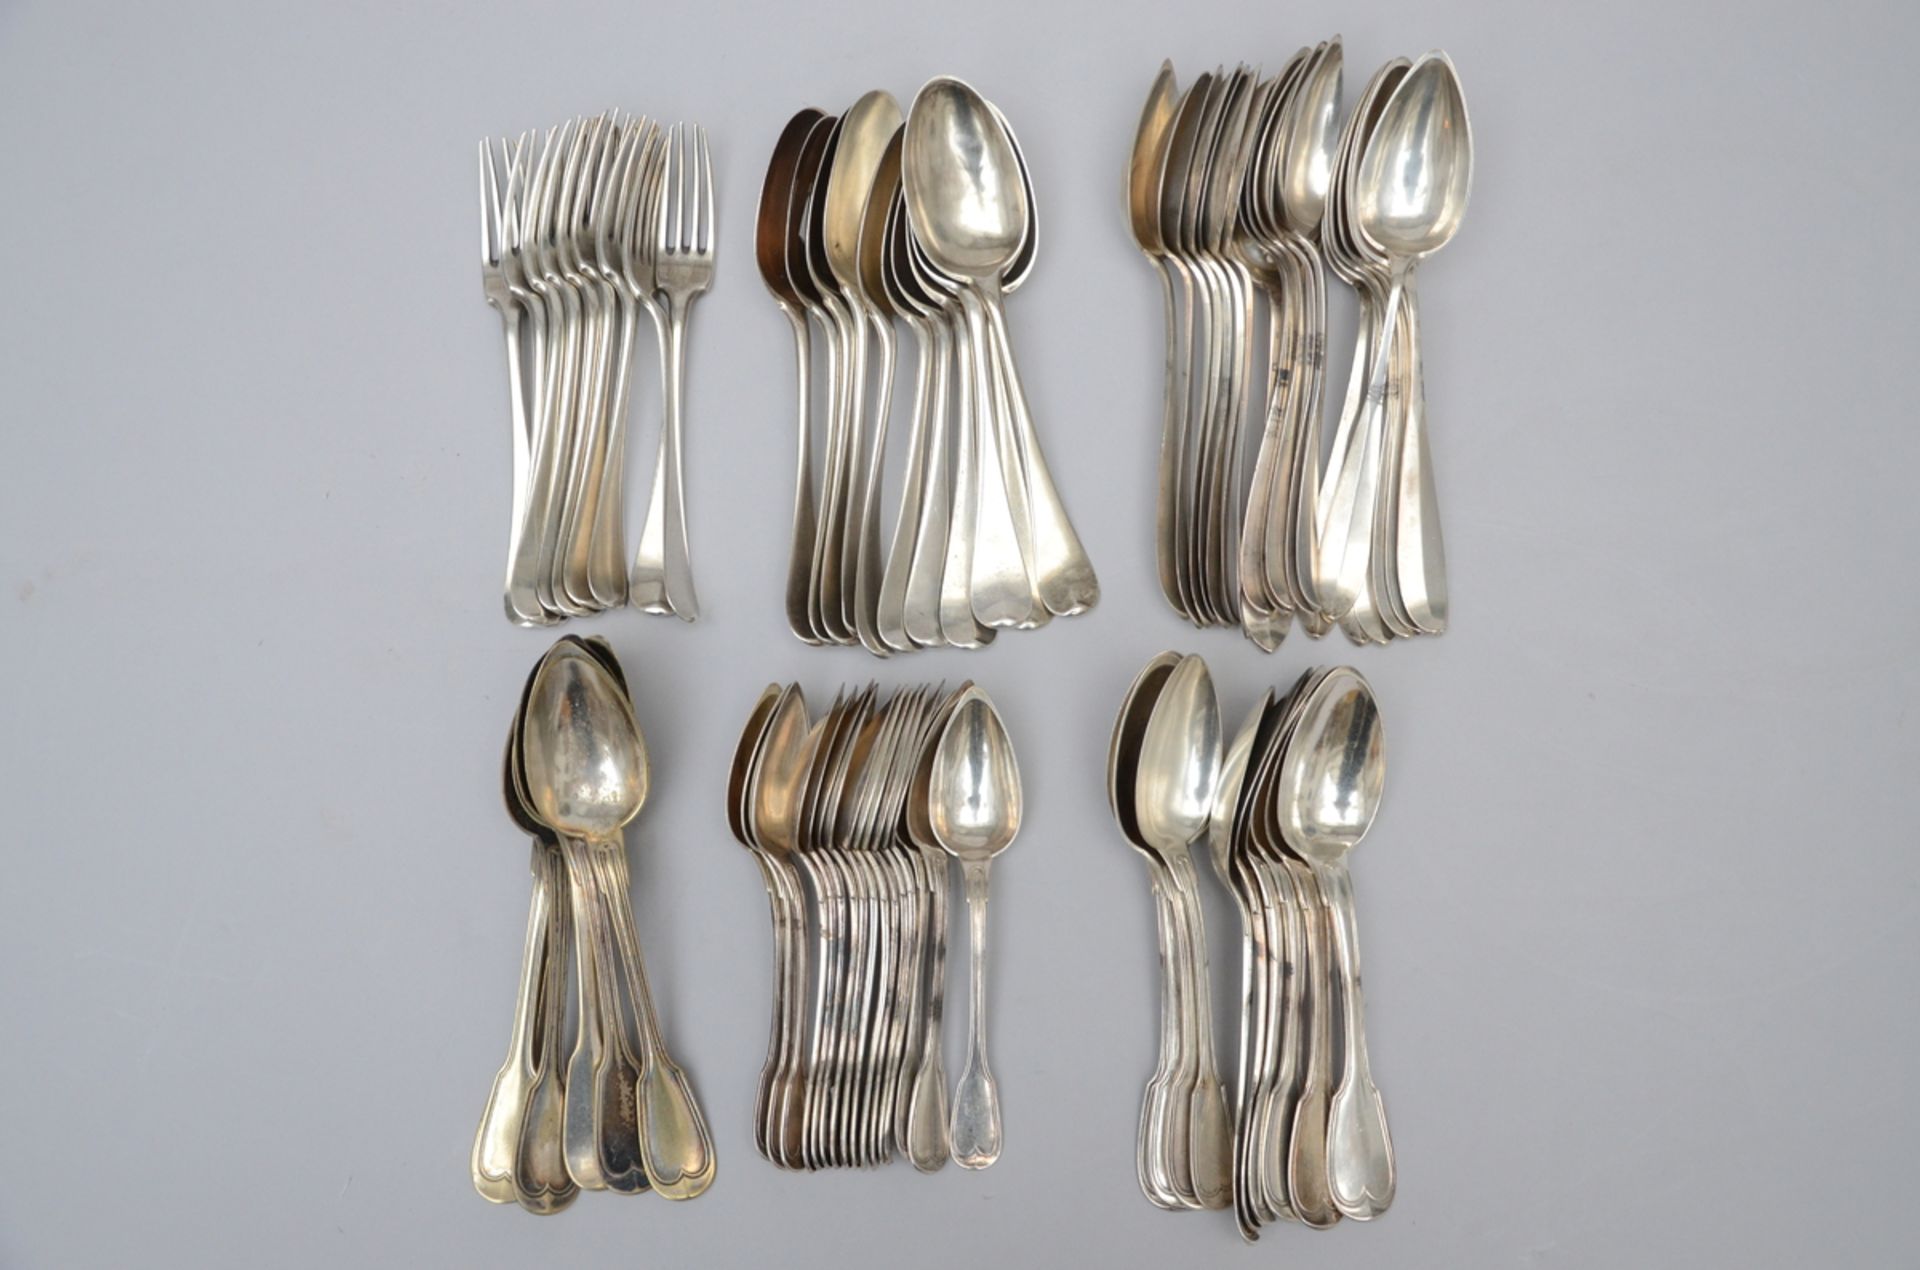 Part of a cutlery set in silver and silverplate metal